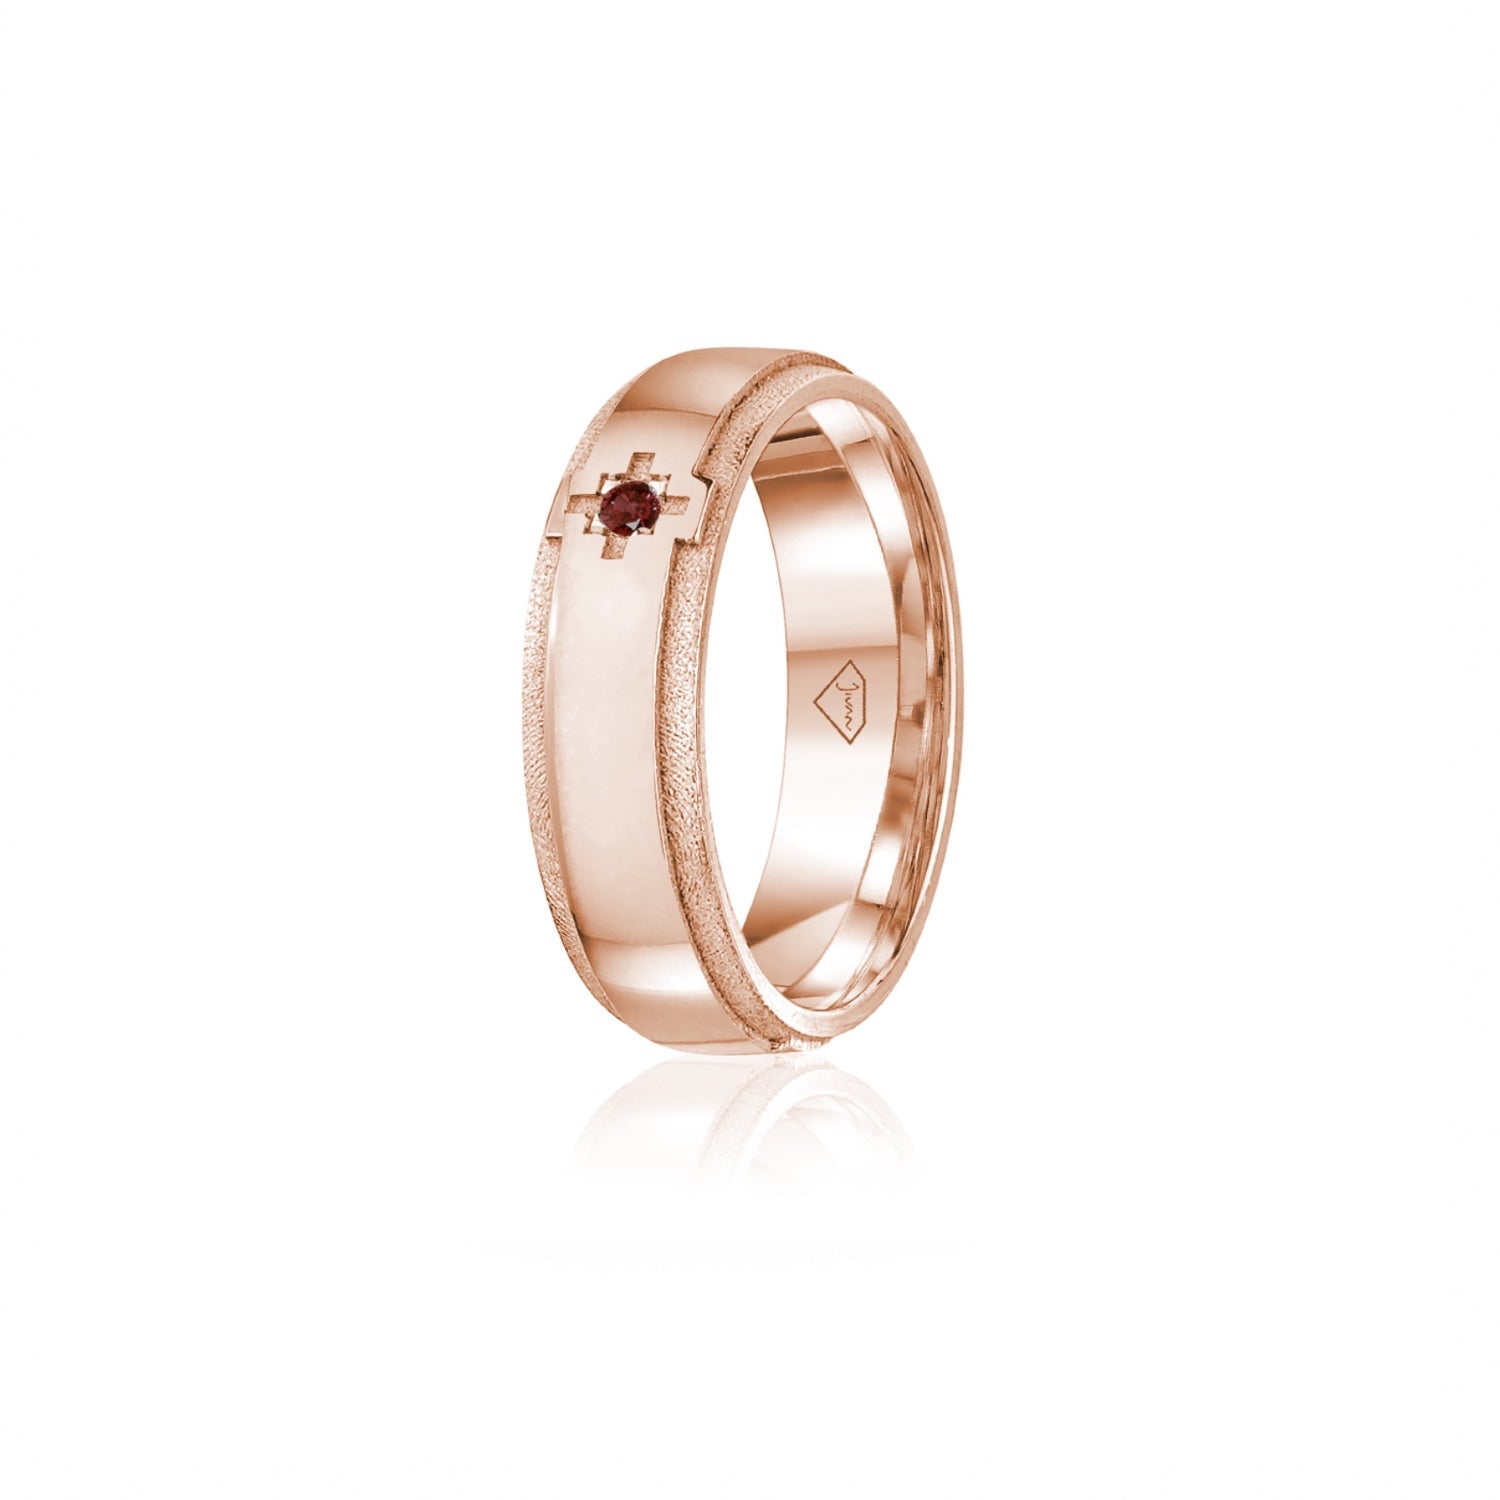 Ruby Accent Polished Finish Bevelled Edge 8-9 mm Wedding Ring in Rose Gold